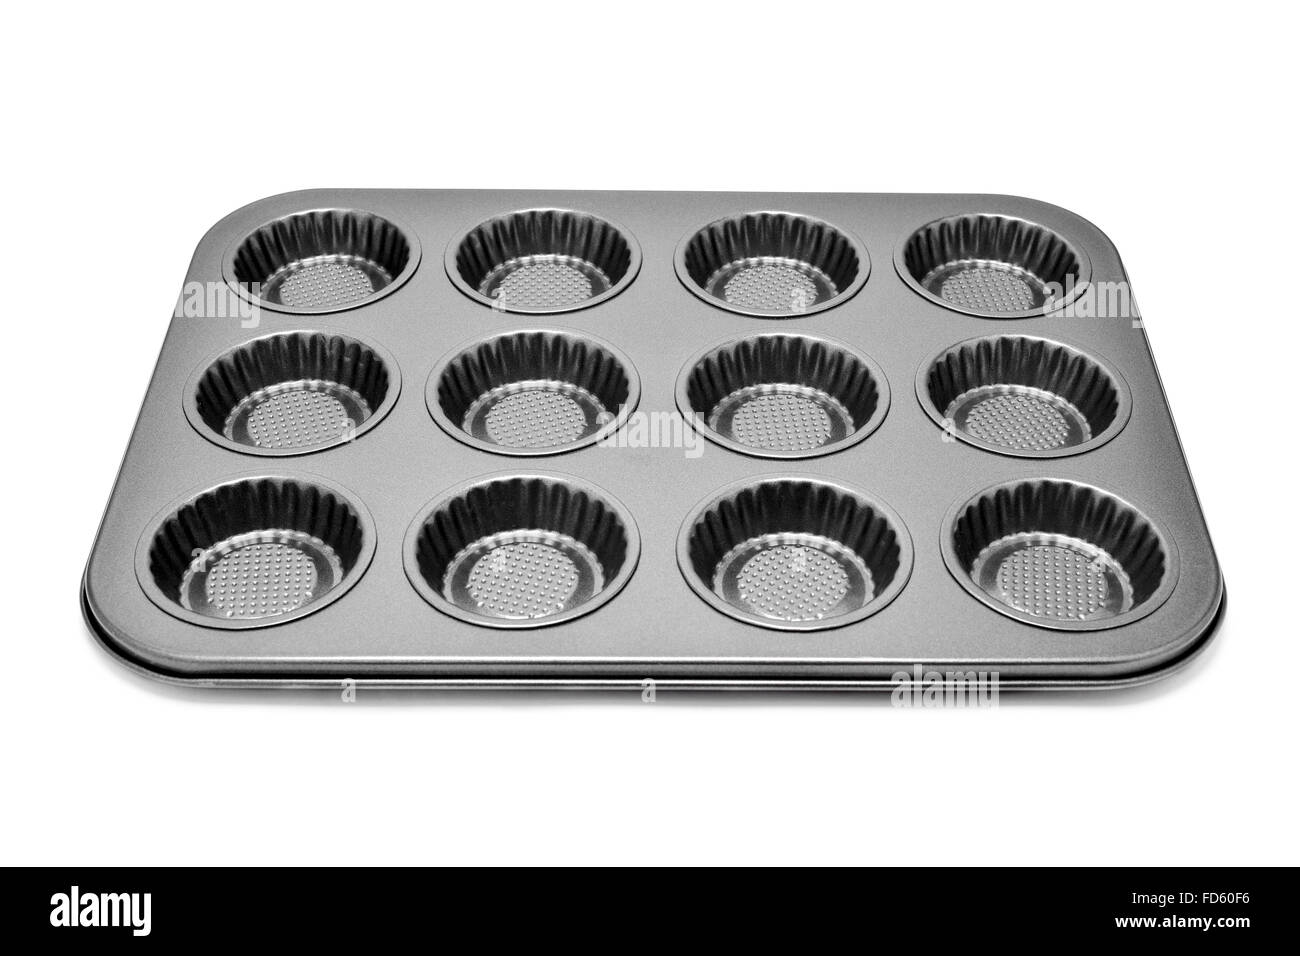 Rectangular Black Baking Tray In Oven Isolated On White Background Top View Baking  Tray Stock Photo - Download Image Now - iStock